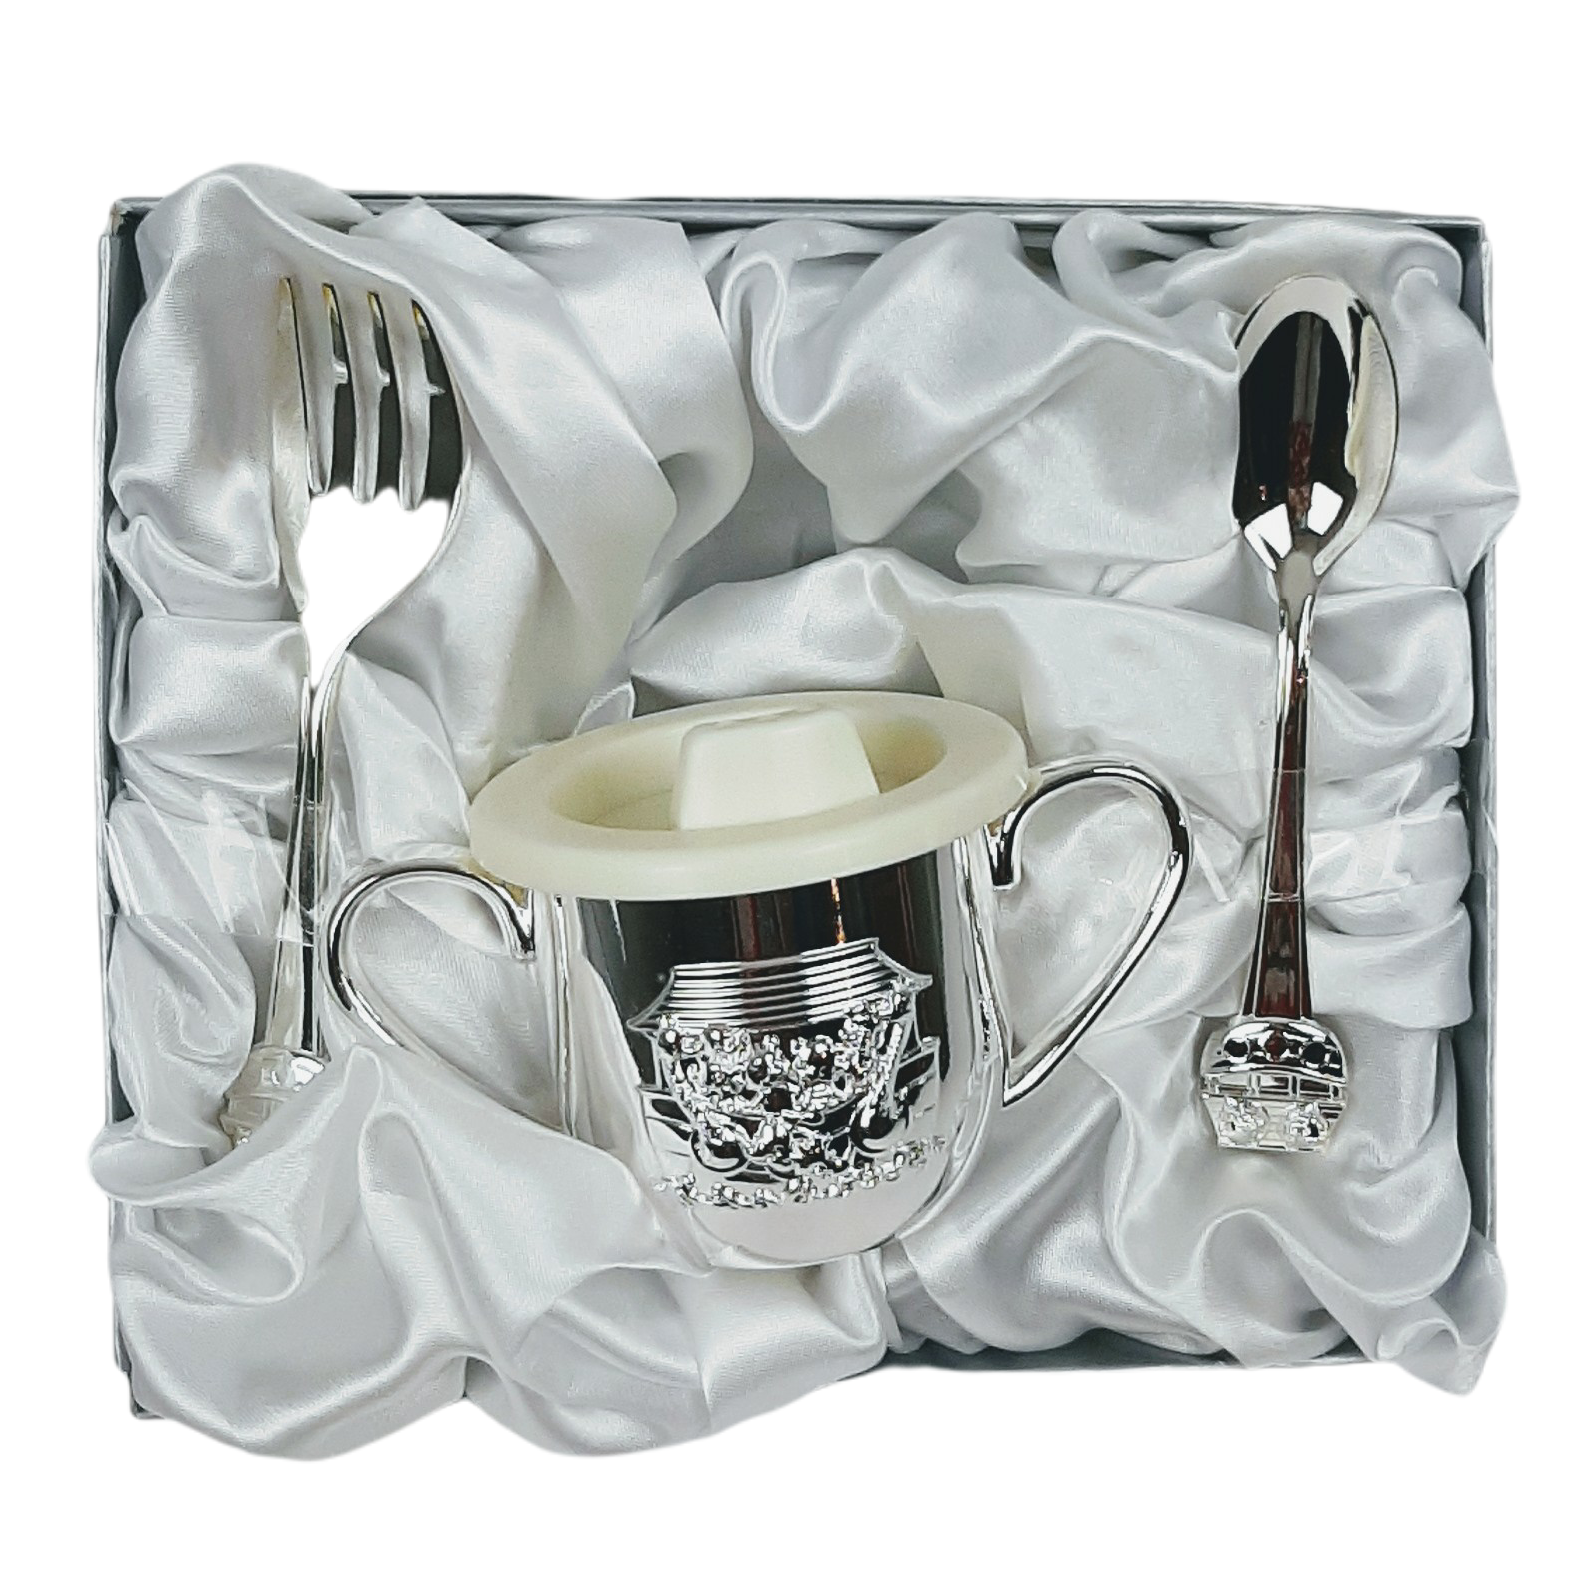 Three piece baby gift set featuring Noahs Ark motif on silver finish lidded cup, spoon and fork.